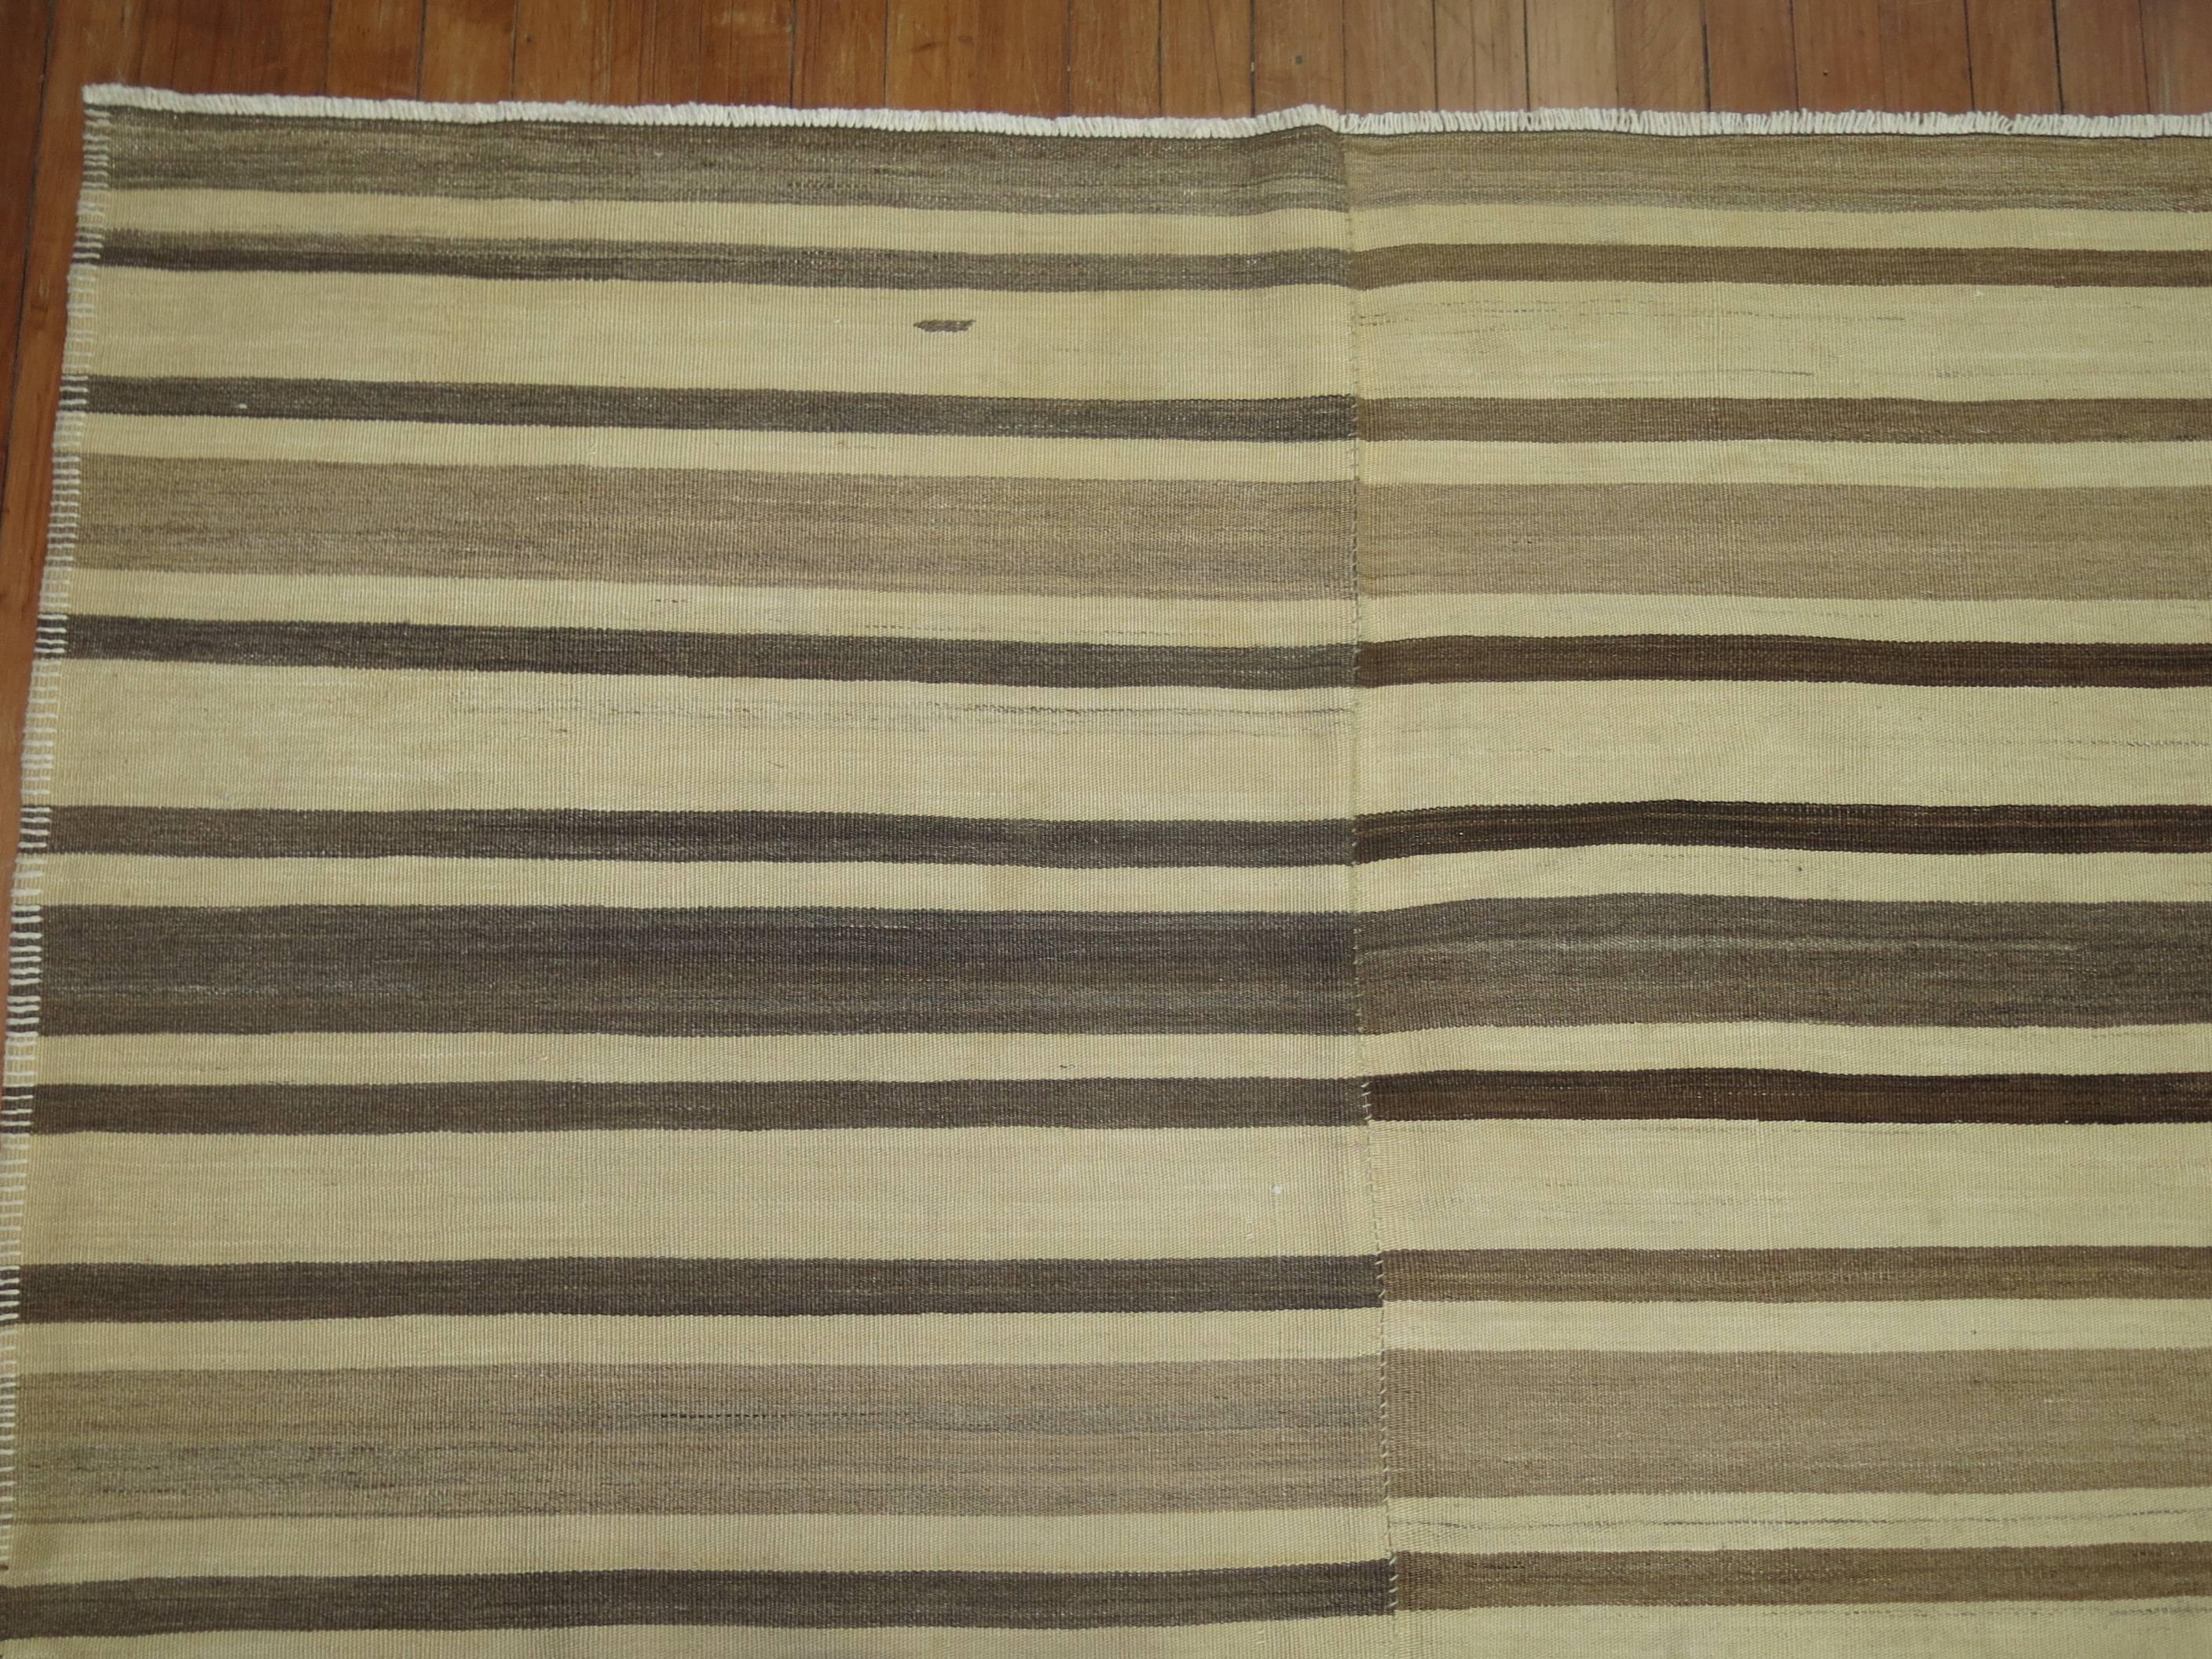 A vintage turkish kilim with a striped motif in browns and cream.

5'1'' x 9'9''